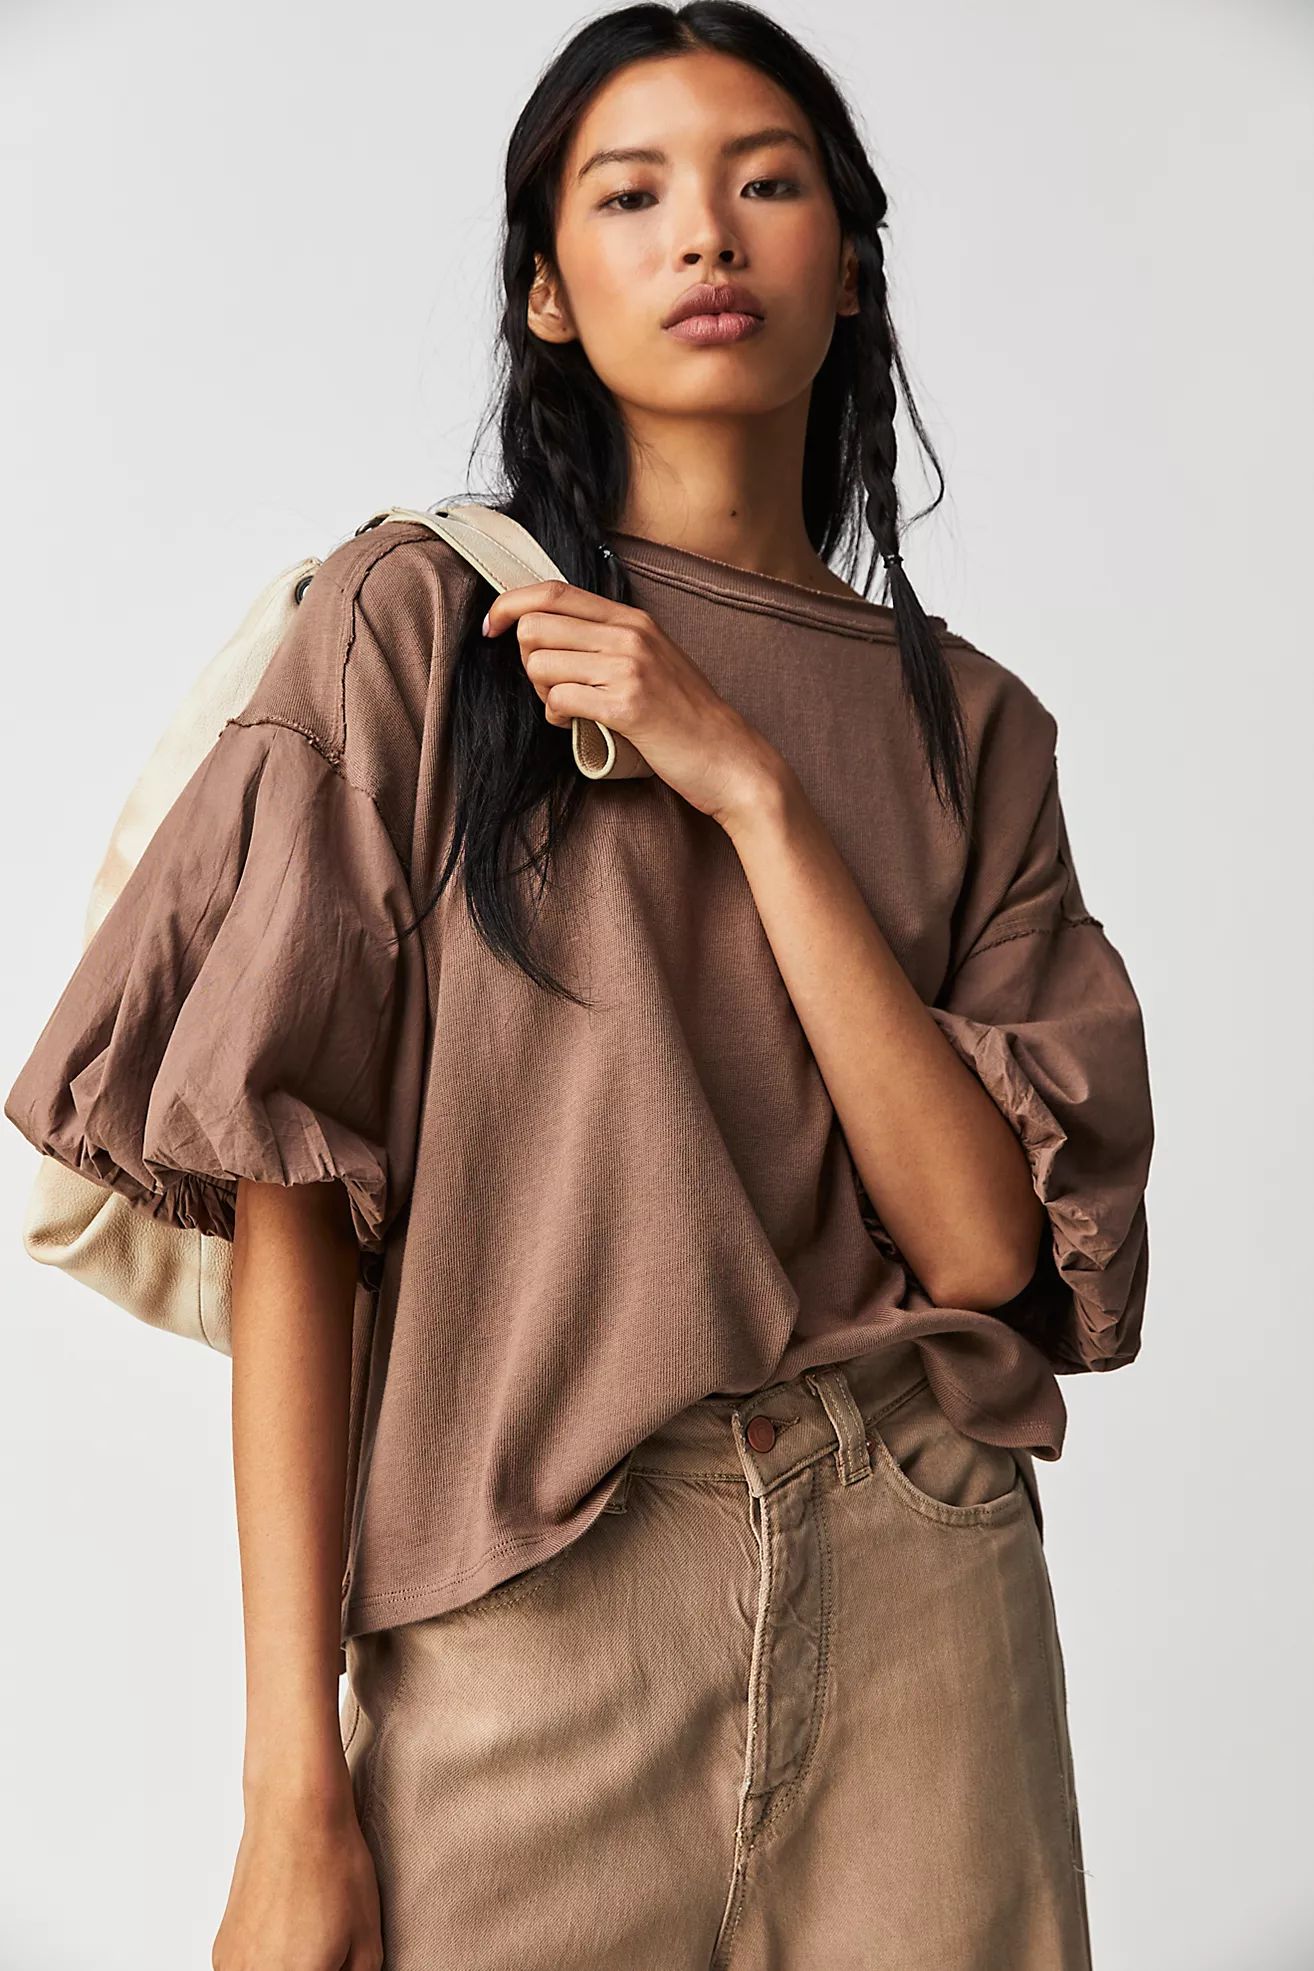 Blossom Tee | Free People (Global - UK&FR Excluded)